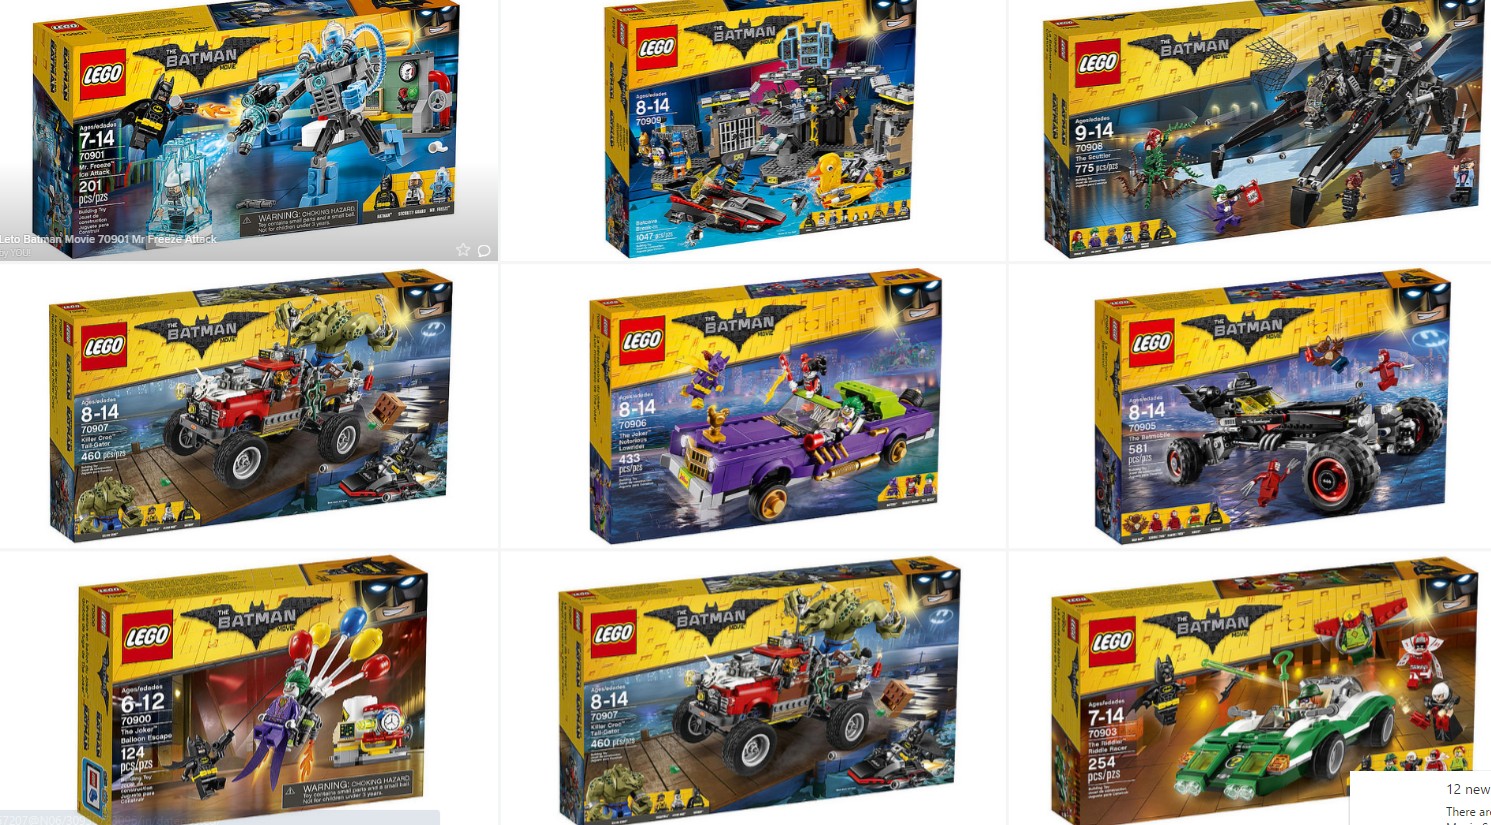 LEGO Batman: The Movie' release date and cover art revealed